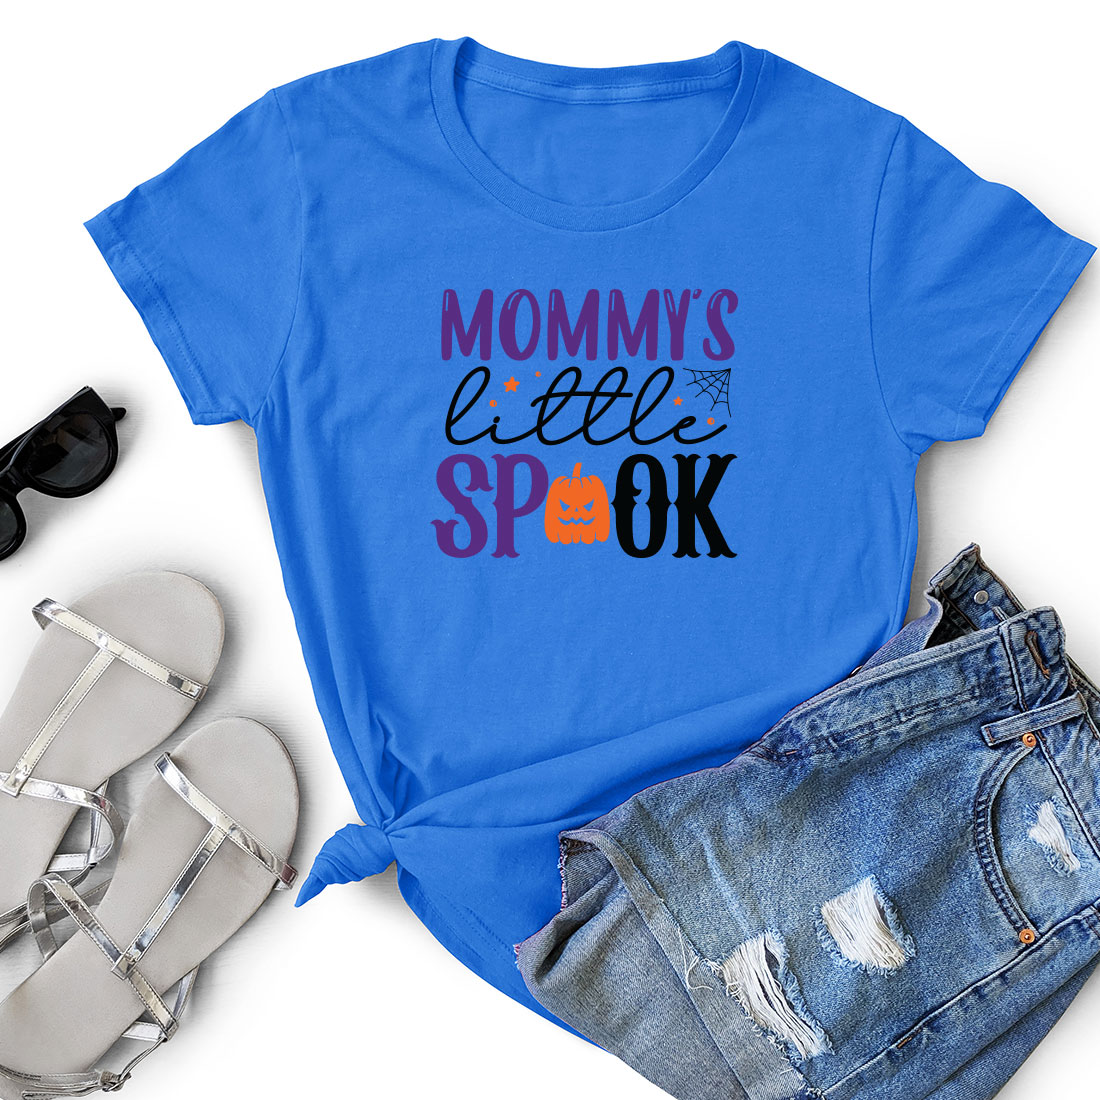 Blue shirt that says mommy's little spook next to a pair of.